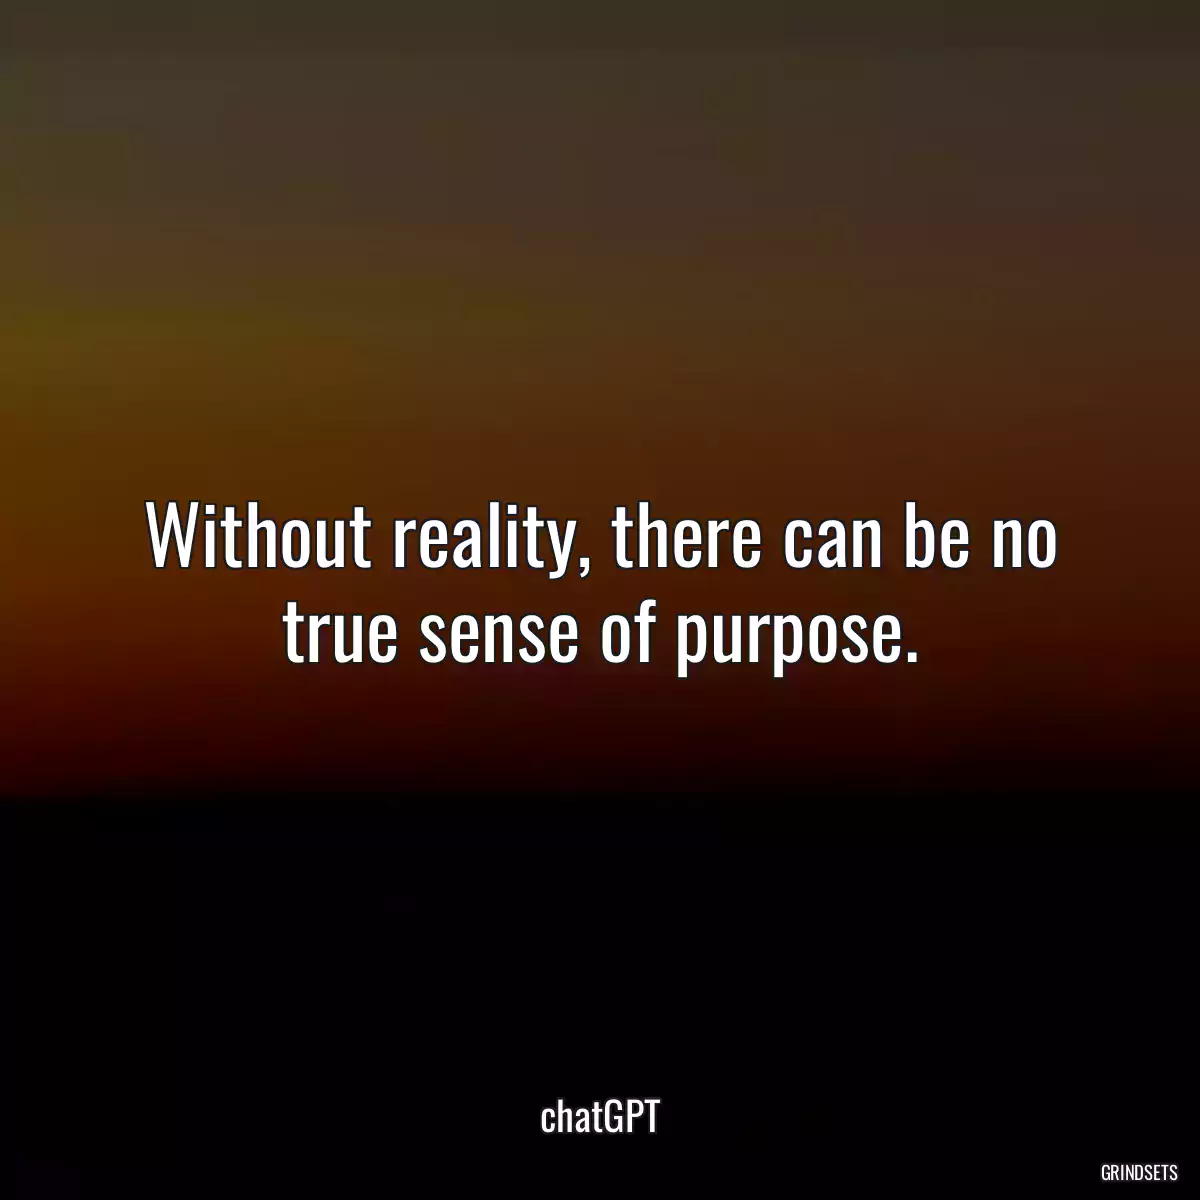 Without reality, there can be no true sense of purpose.